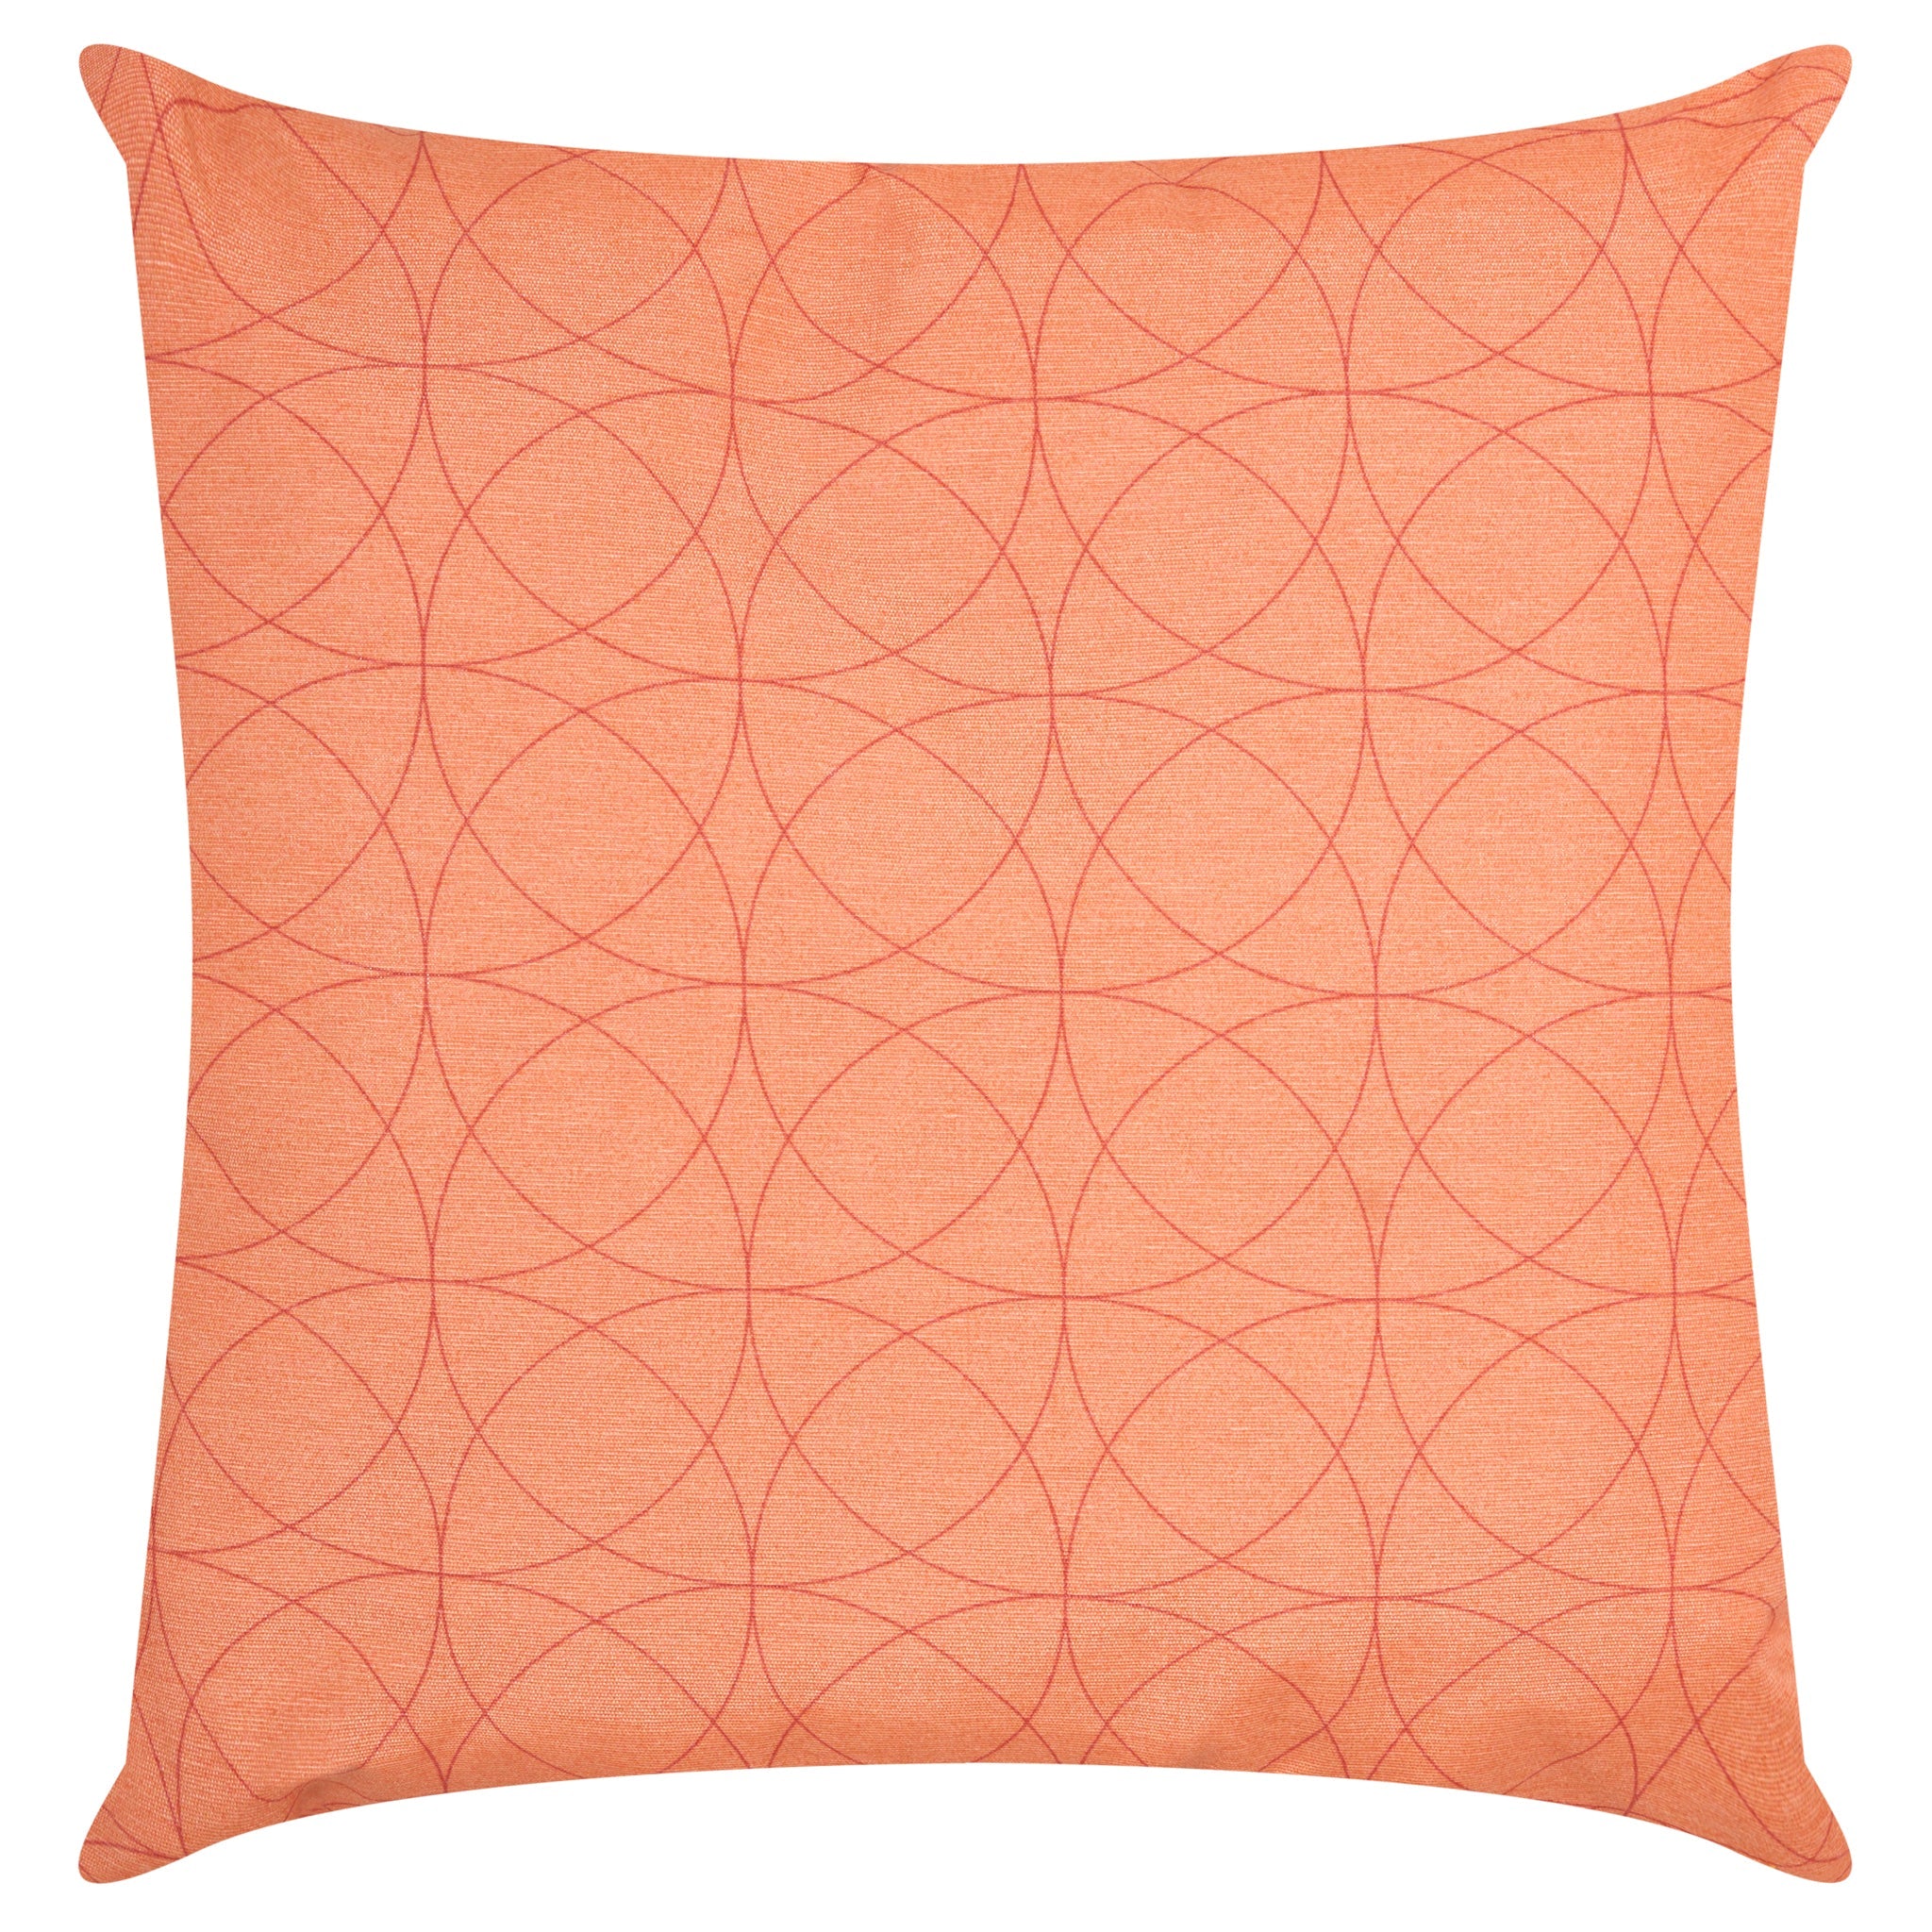 Coral Geometric Outdoor Garden Cushion - 42 x 42cm-8713229053635-only5pounds.com